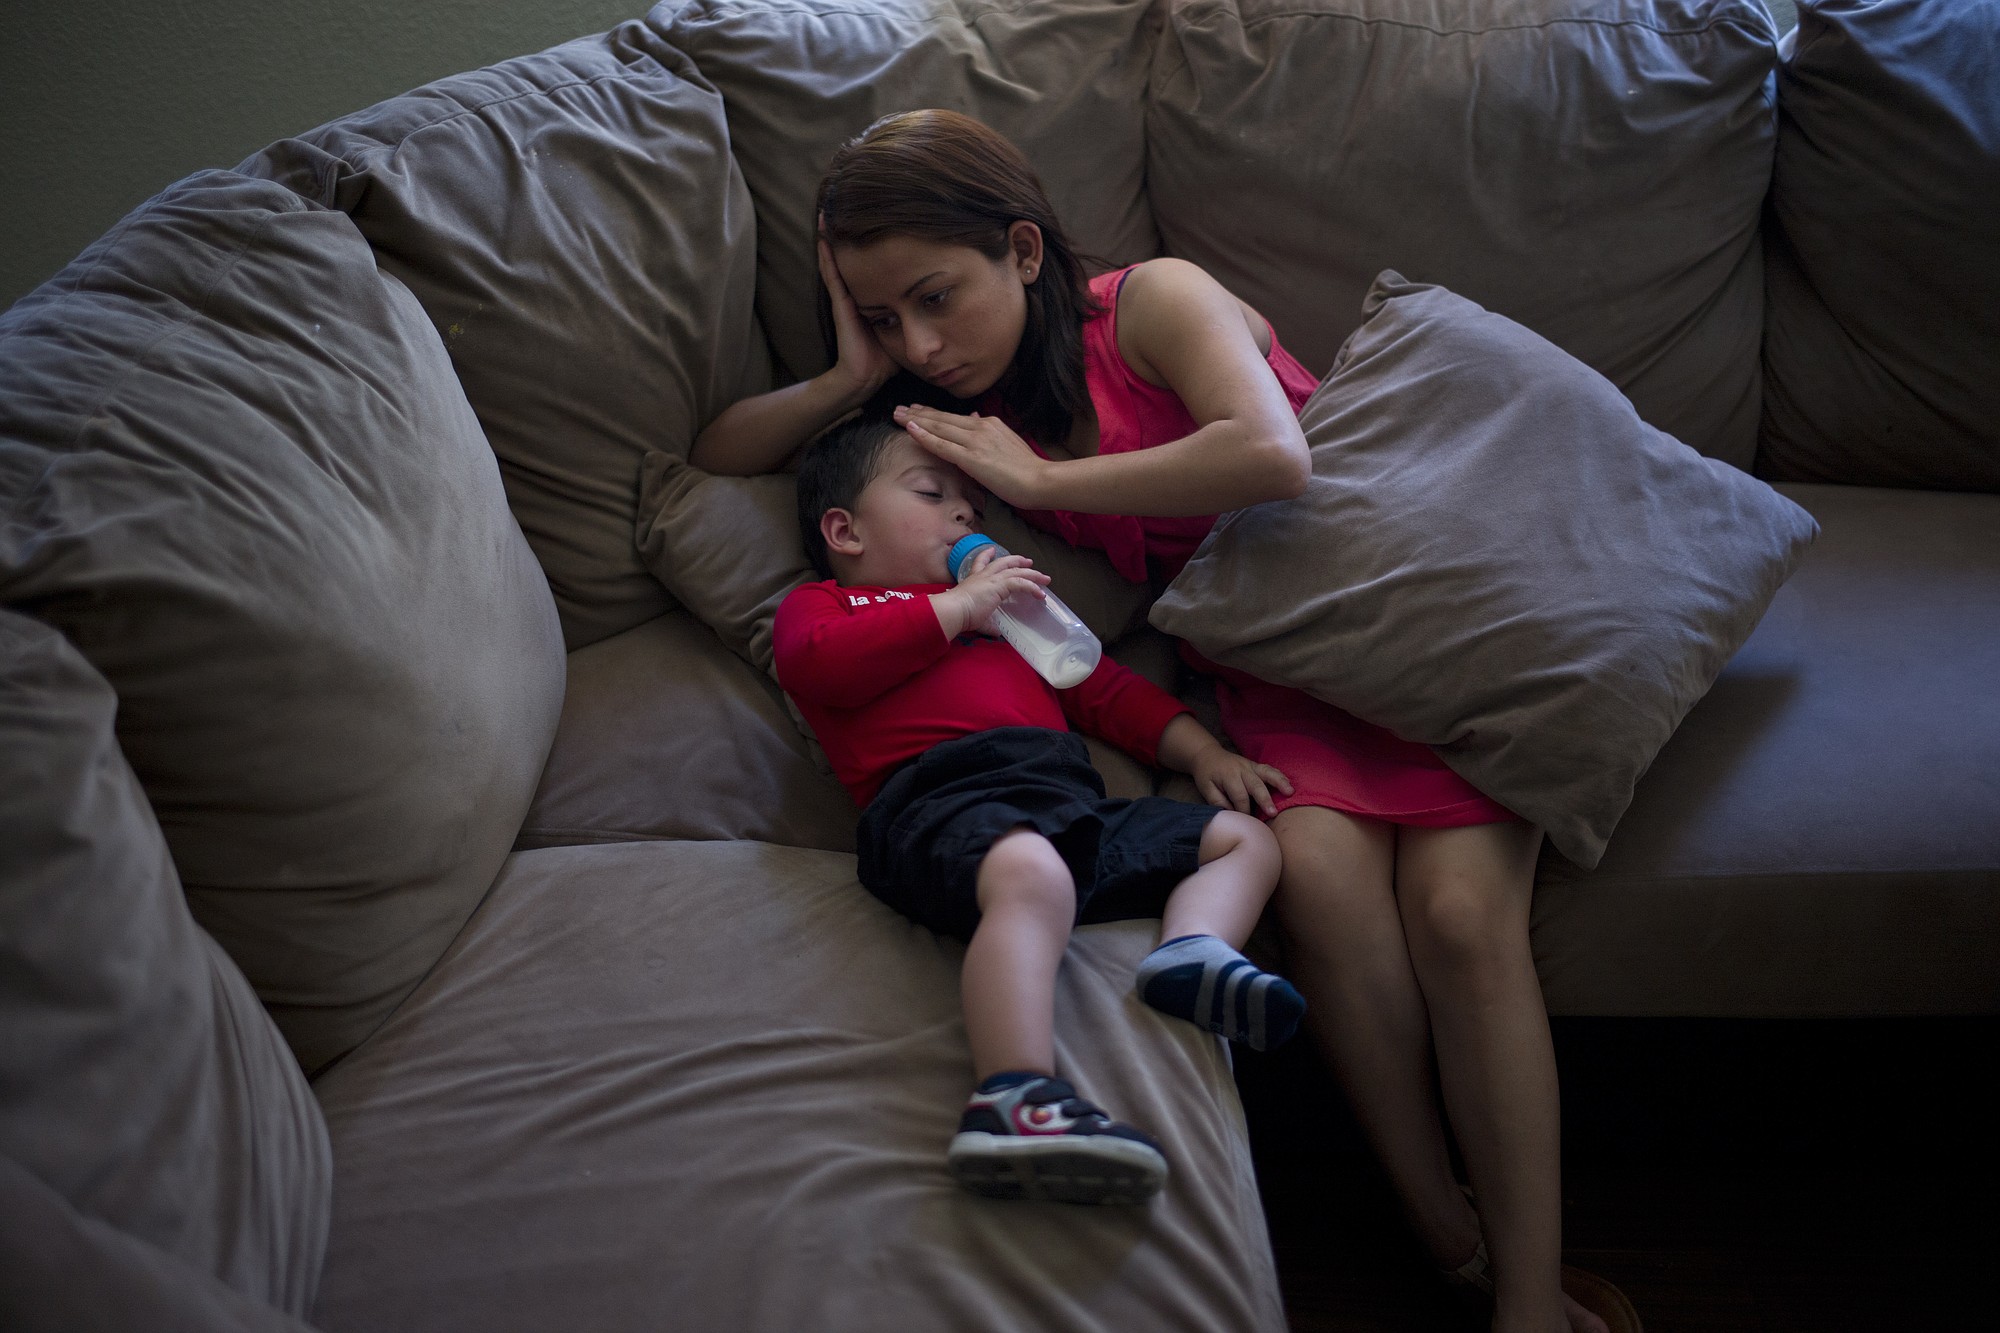 Joshua Tinoco, 1, snuggles with his mother, Dunia Bueso, 18, at a relative's home in Los Angeles. At a brief hearing, a government lawyer told the teenage mother that her son is an immigration enforcement priority for the U.S.